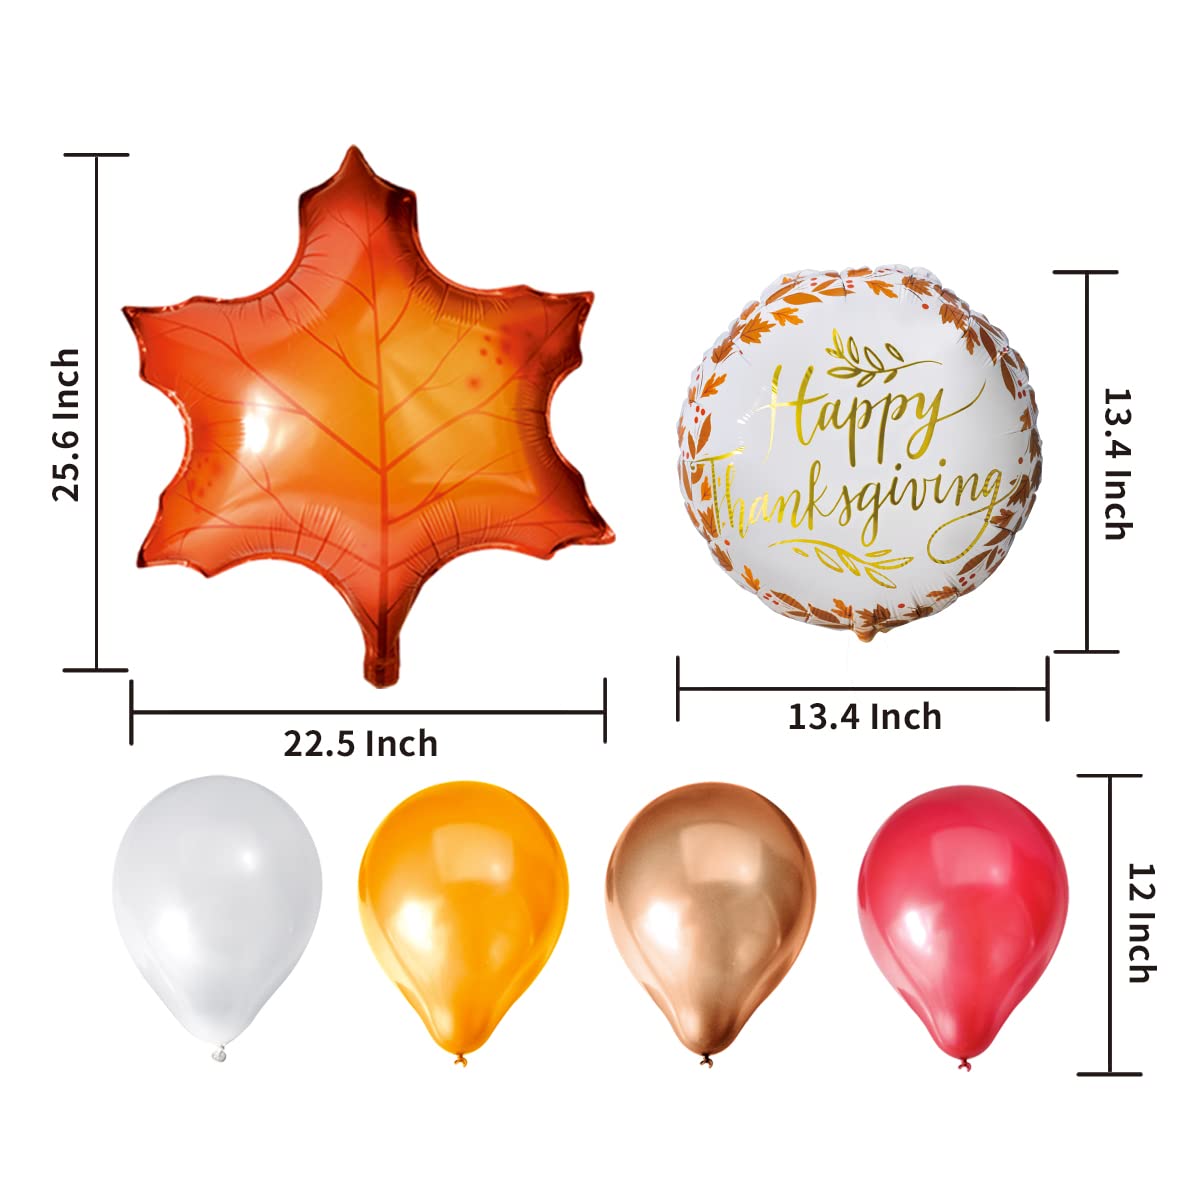 JOYIN 30 Pcs Thanksgiving Party Decoration Set Includes Pink FRIENDGIVING Foil Banner, 3 Large Maple Leaf Balloons, 2 Combo and 12 Latex Balloons Hanging Decoration Fall Holiday Decor Party Supplies